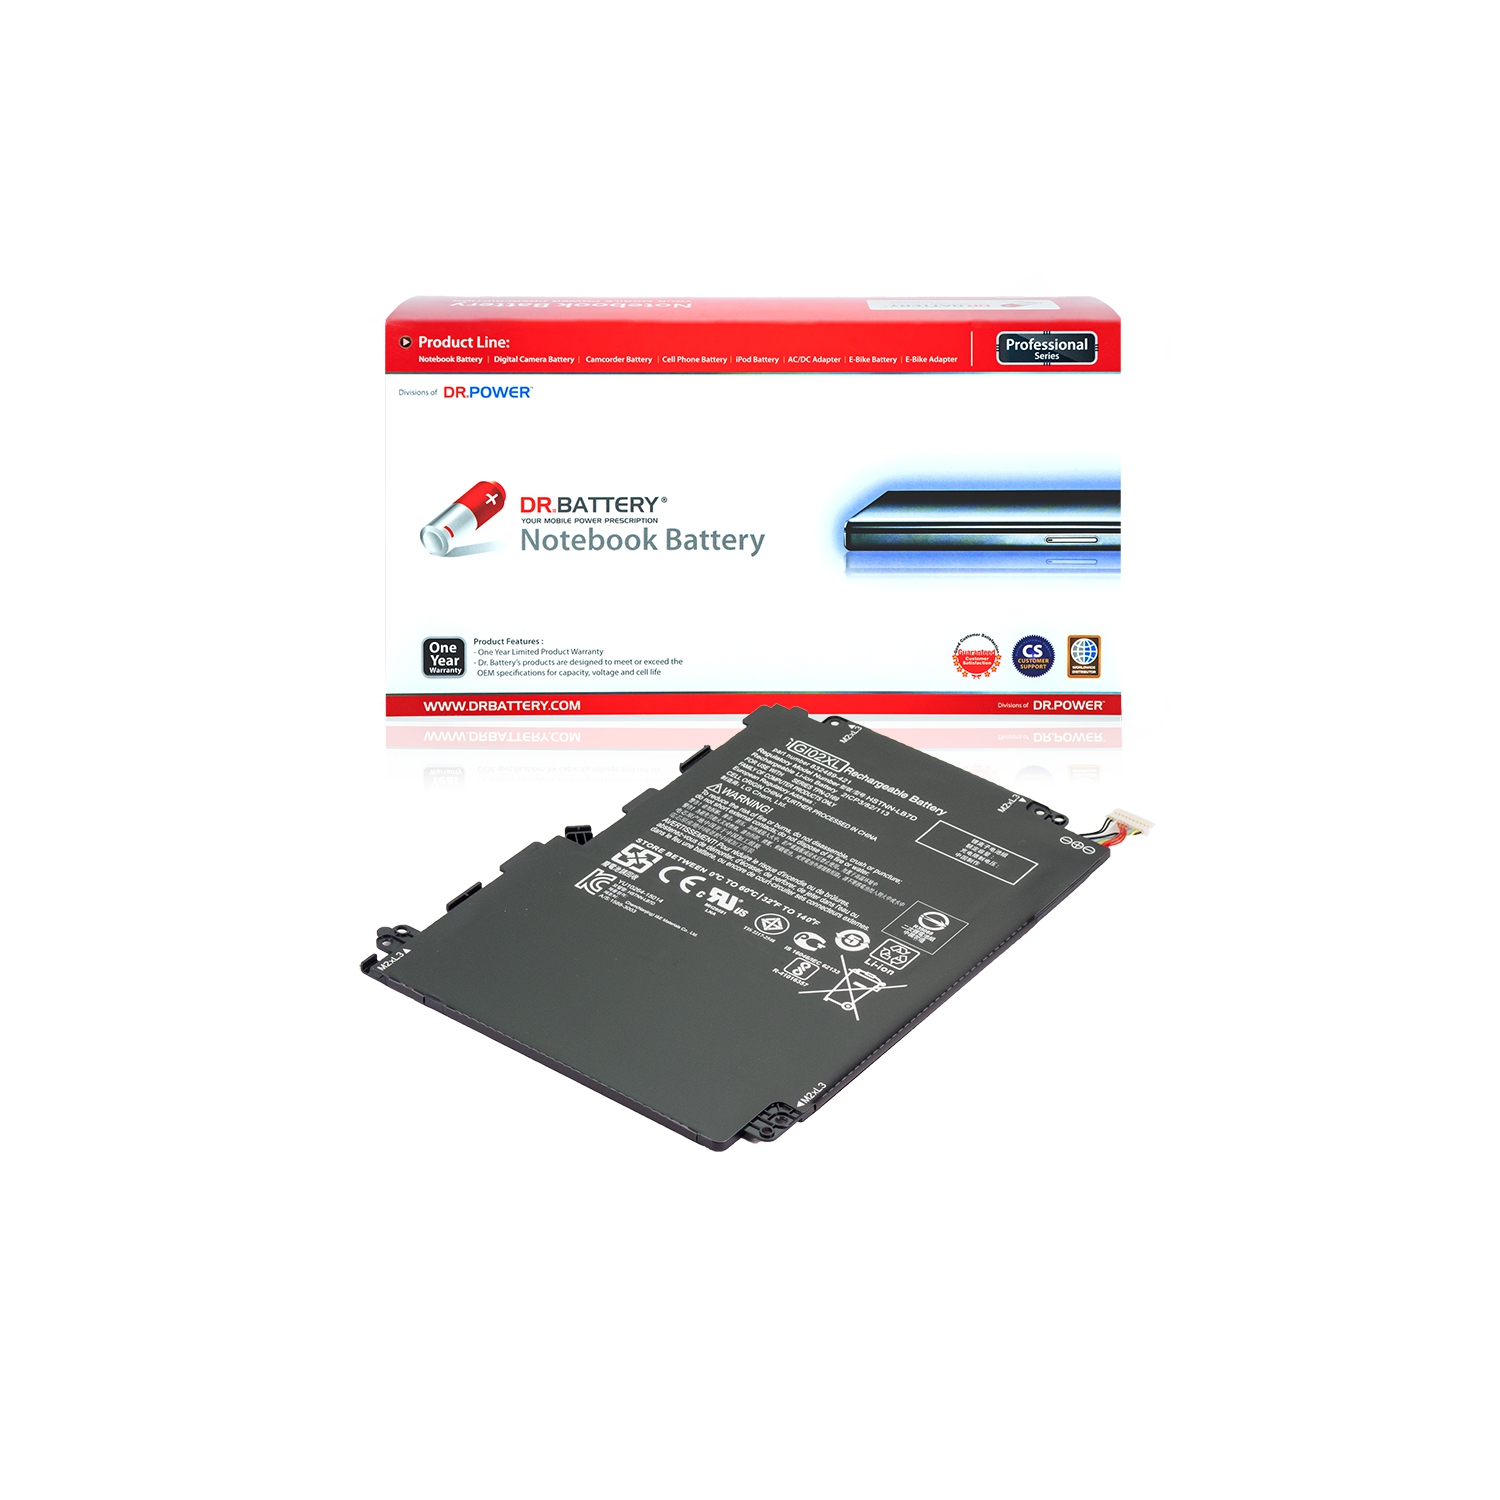 DR. BATTERY - Replacement for HP Pavilion X2 12-b100na / 12-b000 / 12-b010n / 12-b010nr / 841565-001 / GI02XL / HSTNN-LB7D [7.6V / 4200mAh / 33.36Wh] ***Free Shipping***